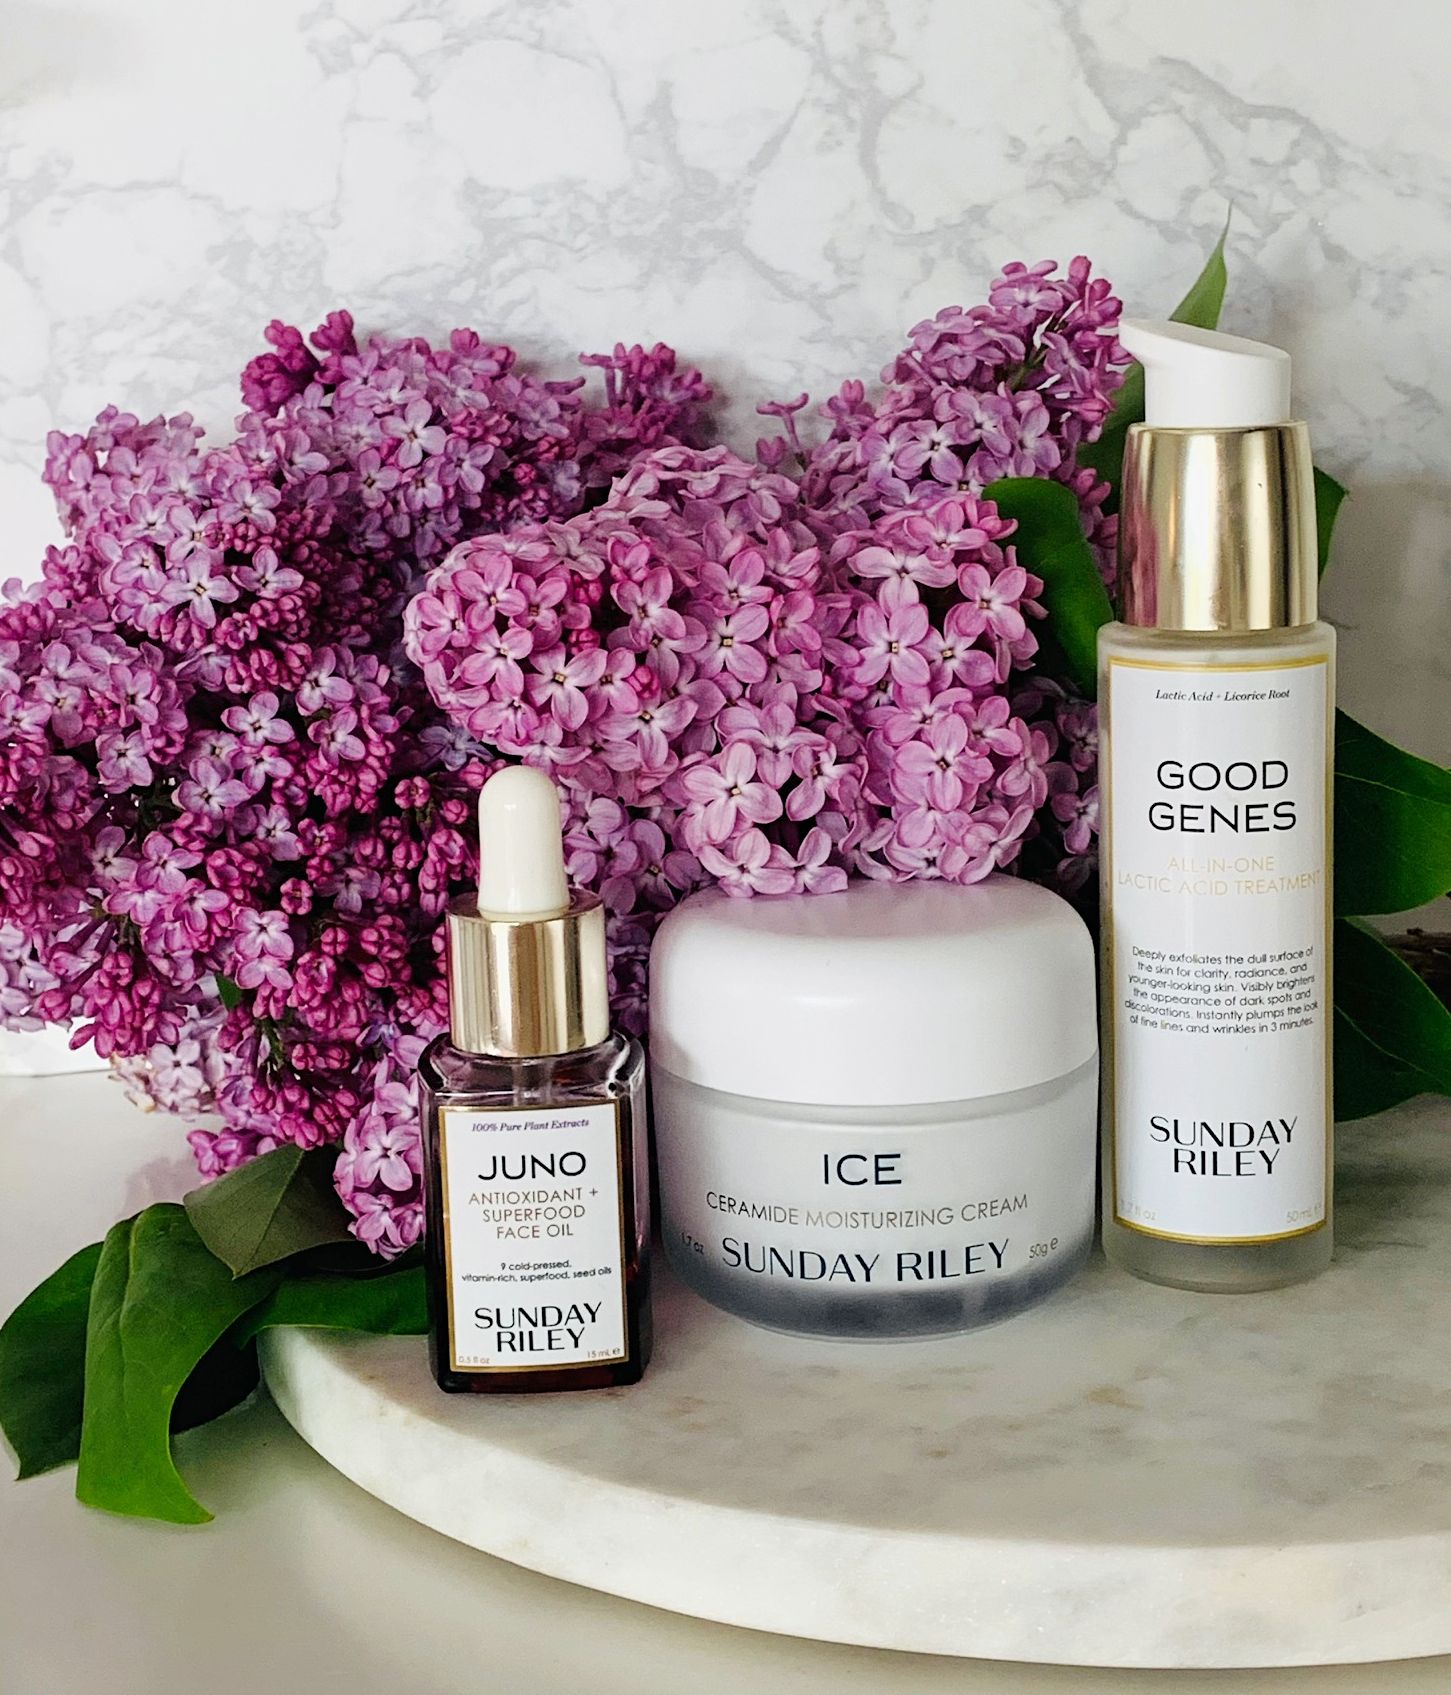 My Sunday Riley Top Picks - Cult Beauty Brand Of The Month